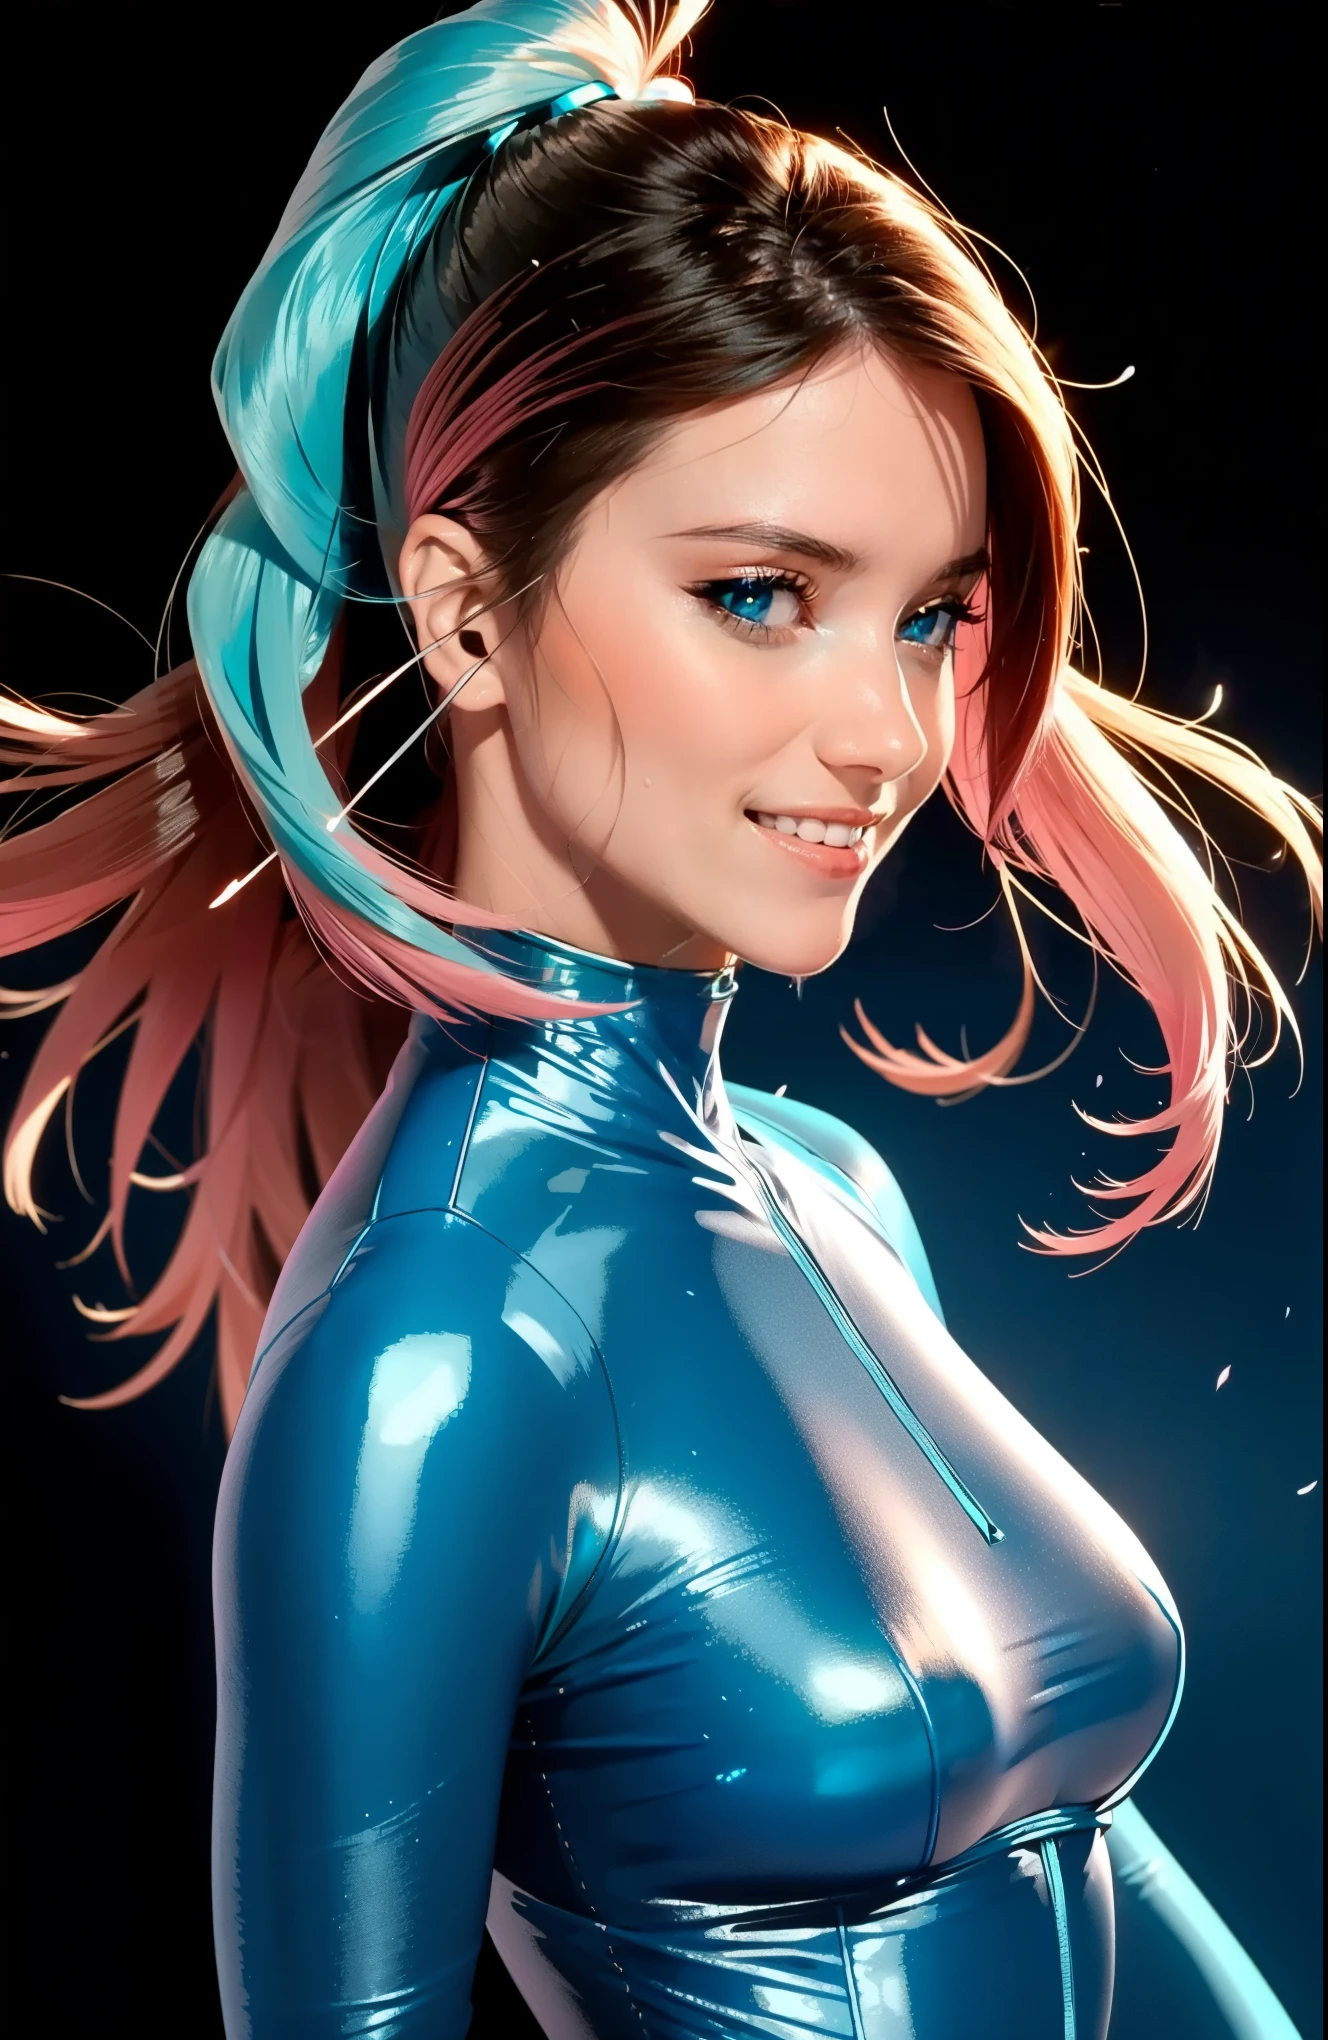 cyberpunk female woman wearing (chromatic accents:1.1), sleek transparent bodysuit, side view turning to face camera, (Petal Blush, Lagoon Blue color background:1.3), amazing smile, looking at camera, 1980’s style poster